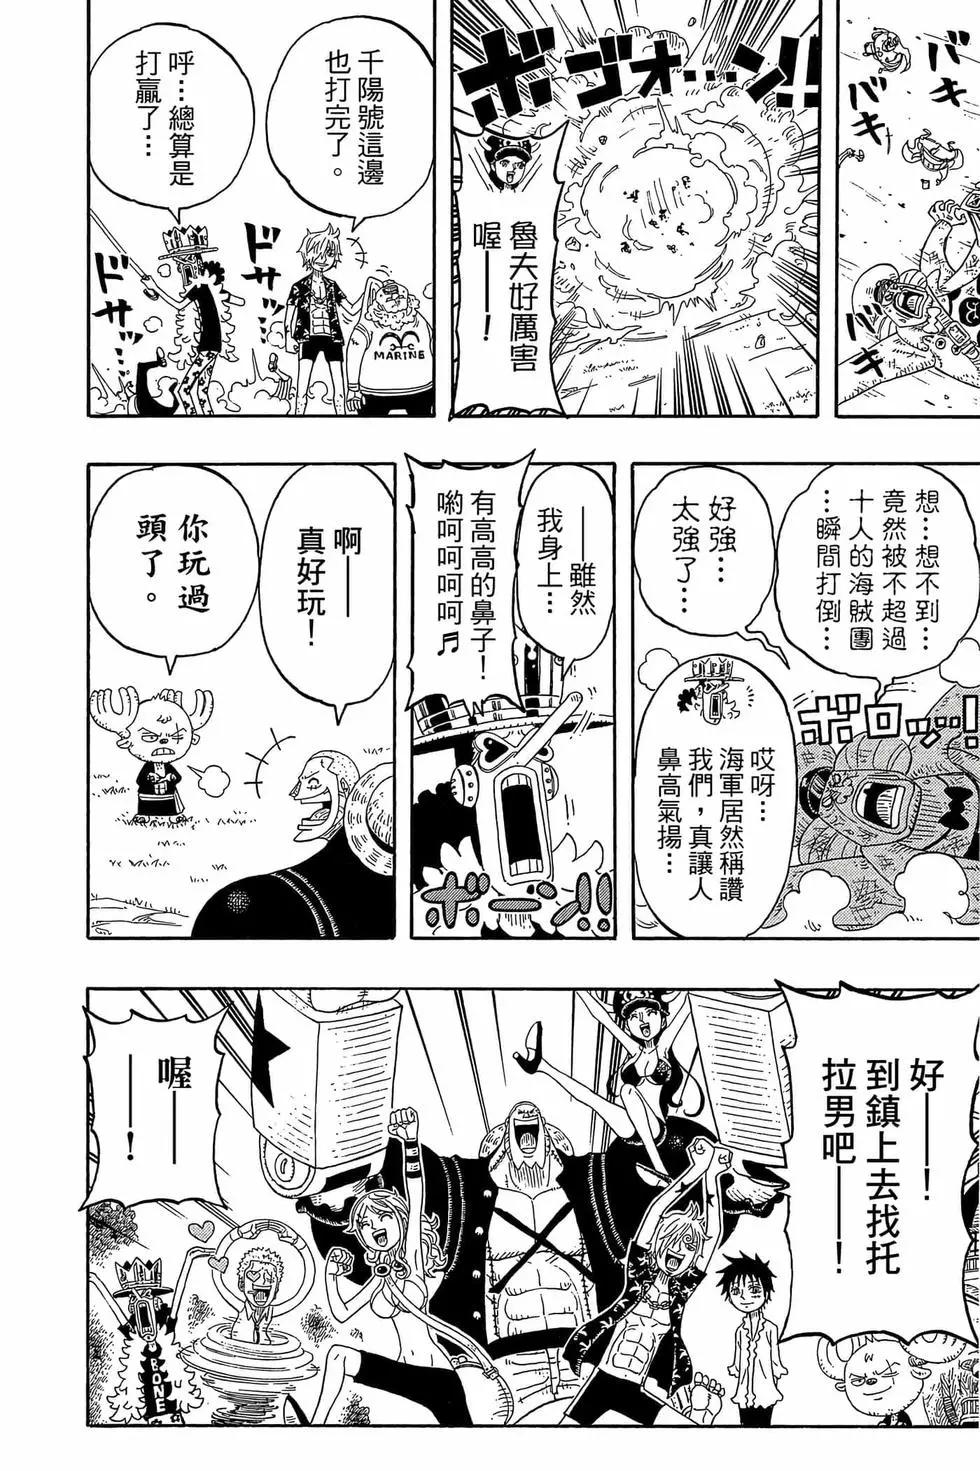 One piece party - 第03卷(4/4) - 1